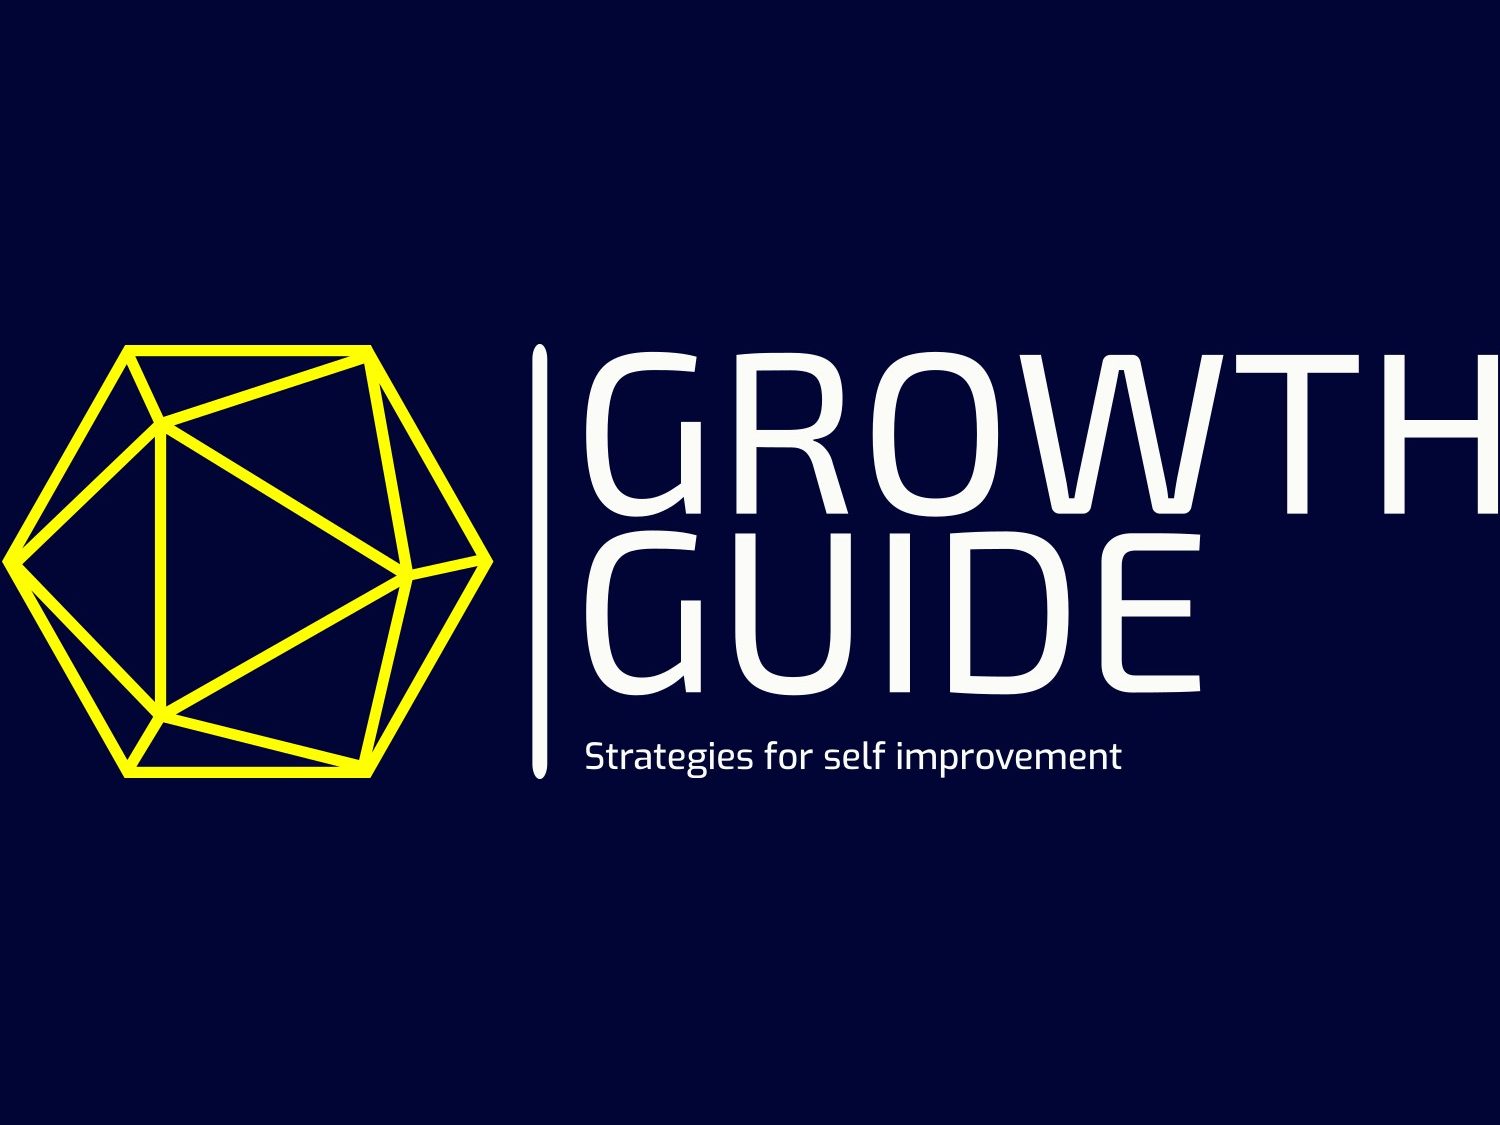 this is the growth guide logo strategies for self improvement